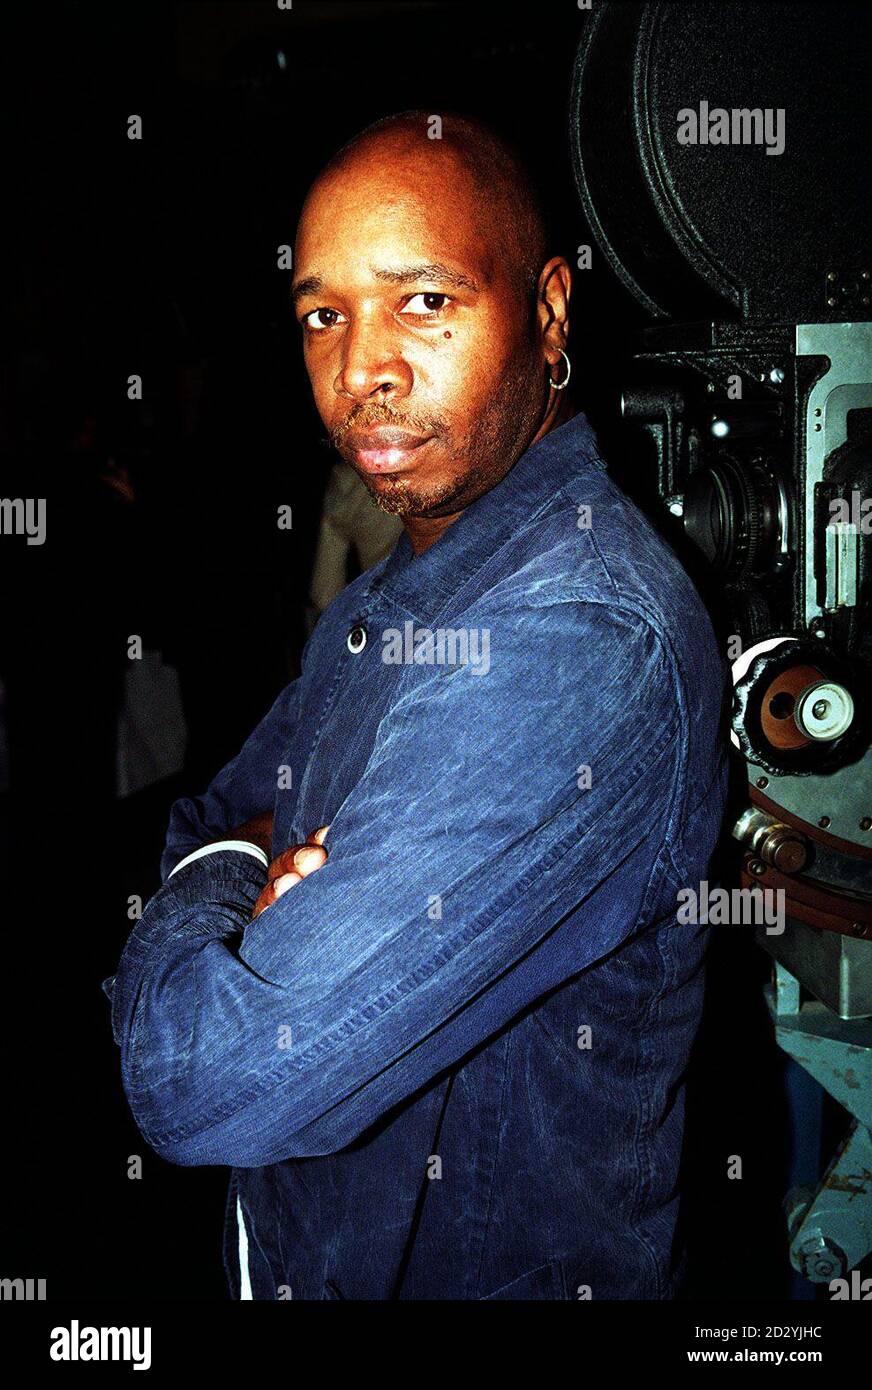 PA NEWS PHOTO 23/4/98 ACTOR LEON HERBERT WHO PROVIDES THE VOICE FOR THE NATIONAL LOTTERY COMMERCIALS AND IS TO PLAY THE LEAD ROLE IN A 6 MILLION POUND FEATURE FILM OF BLACK CULT HERO JOHN DEVINE, THE CULTURAL AMBASSADOR AT THE MUSEUM OF THE MOVING IMAGE, LONDON Stock Photo